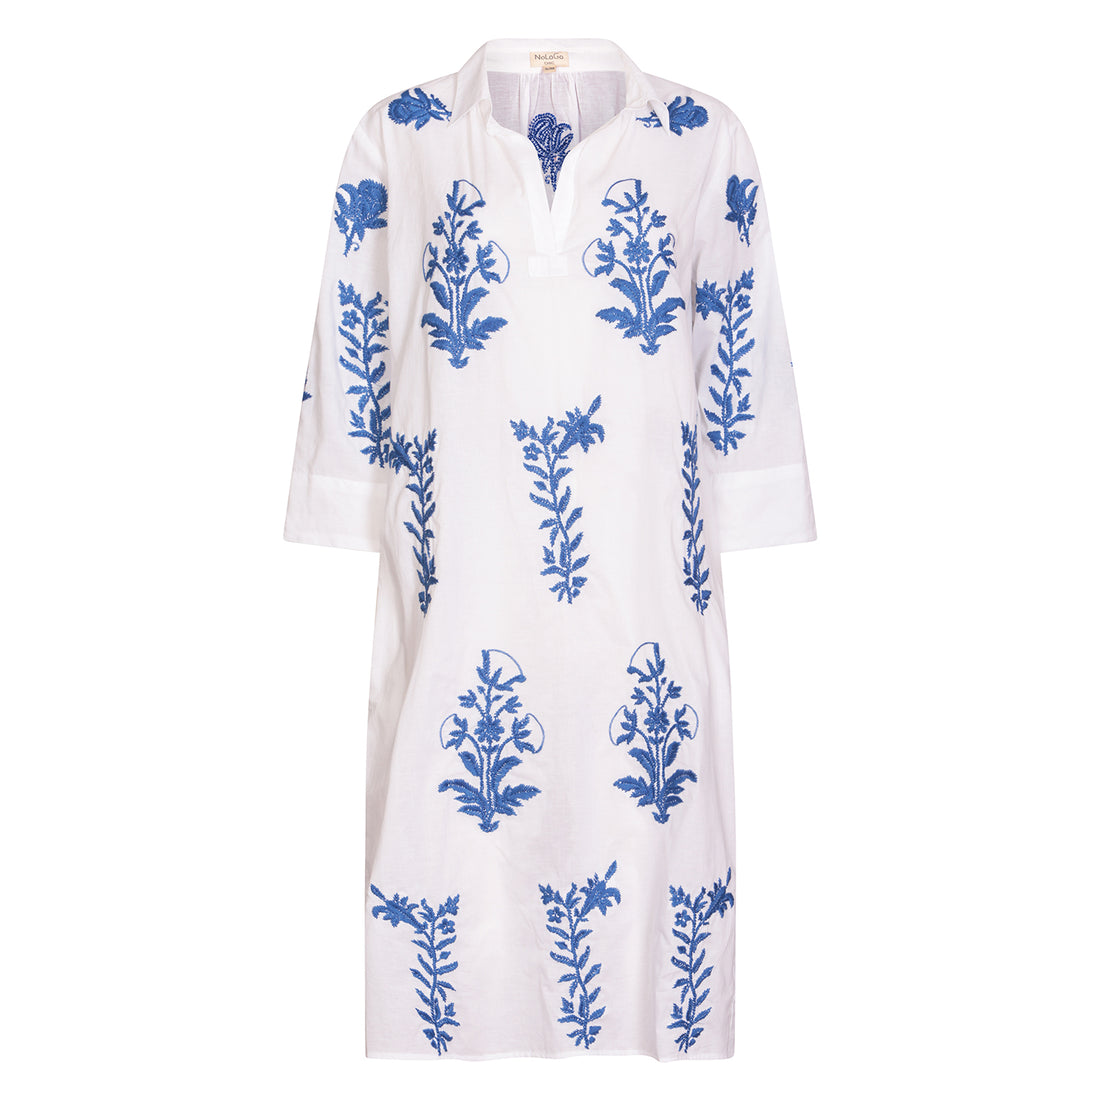 Long Tourist Dress White with Blue Embroidery Cotton White